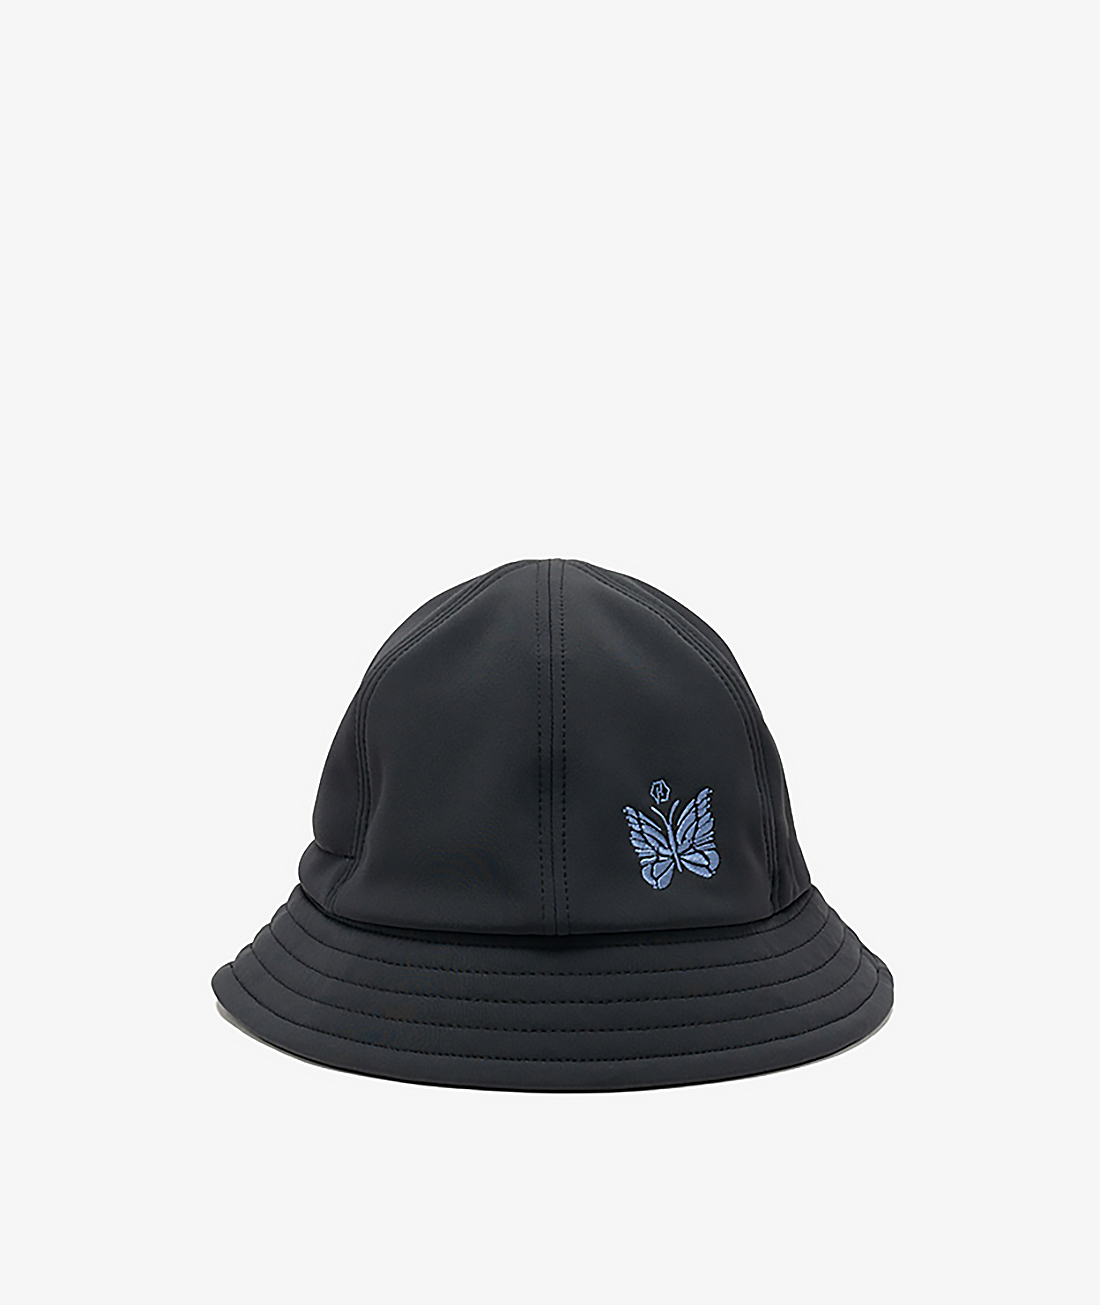 Norse Store | Shipping Worldwide - Haven Needles Bermuda Hat -